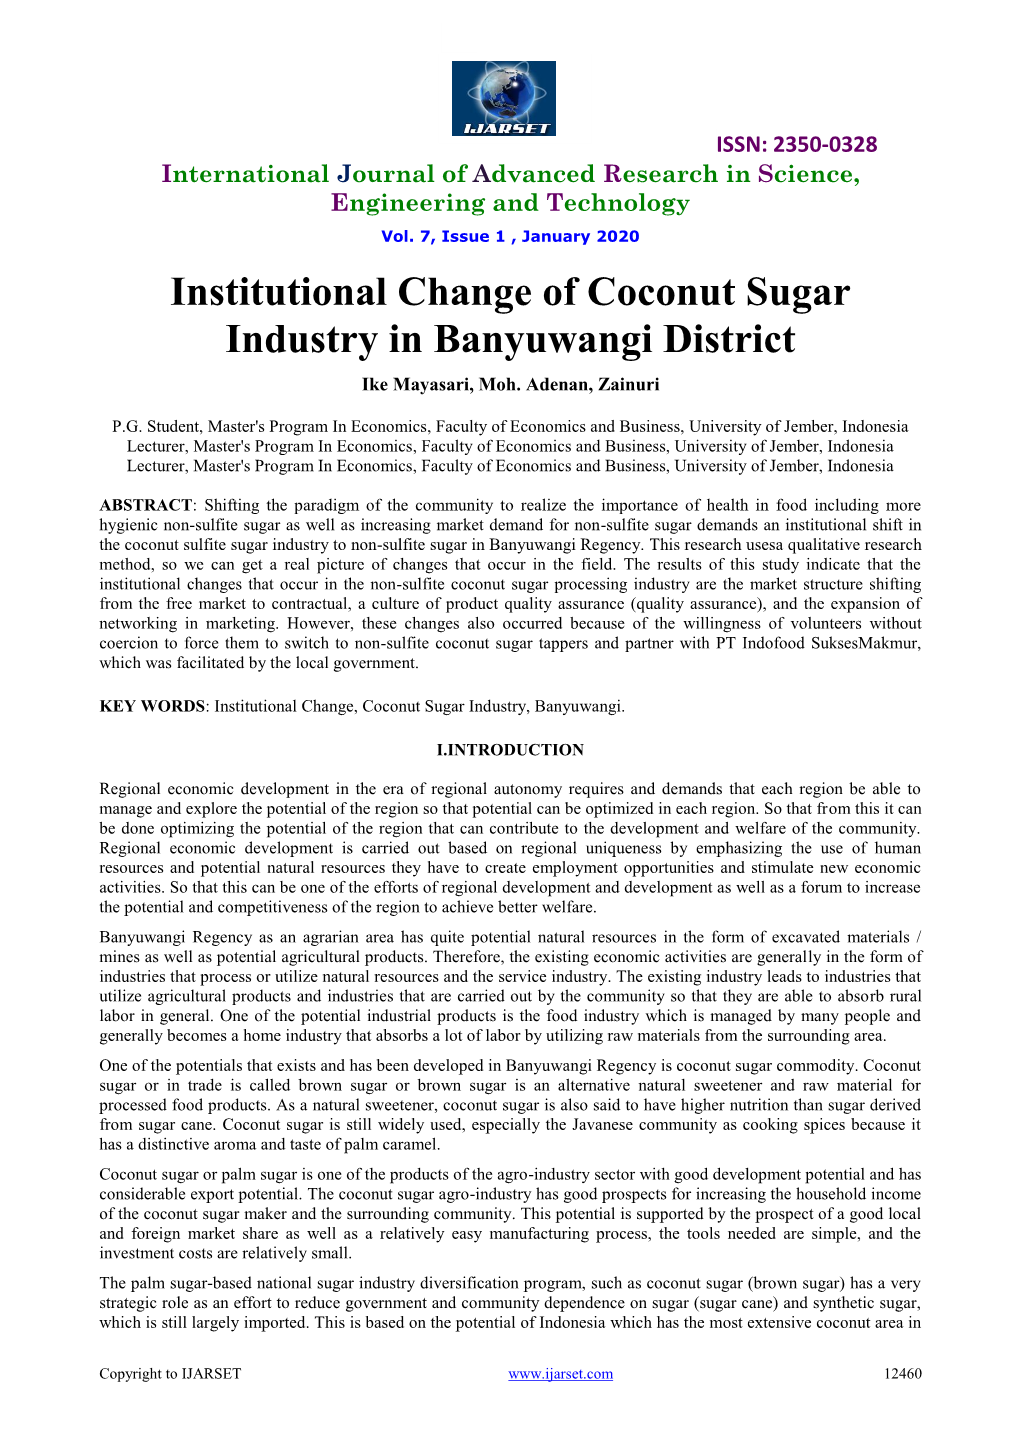 Institutional Change of Coconut Sugar Industry in Banyuwangi District